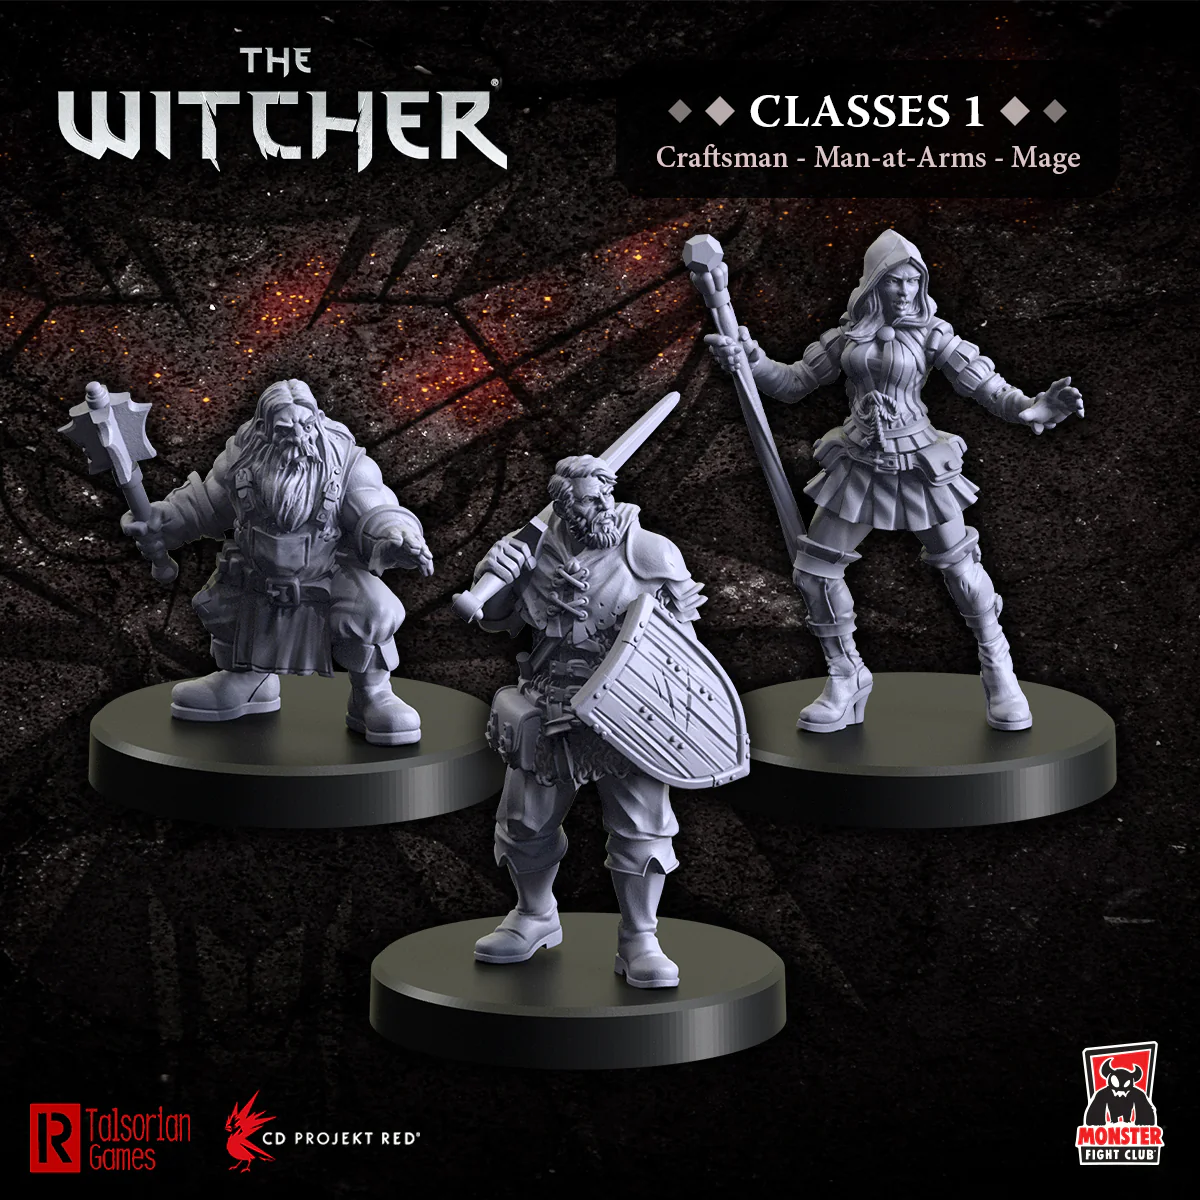 The Witcher: RPG: Clases 3: Craftsman Man-at-Arms Mage 